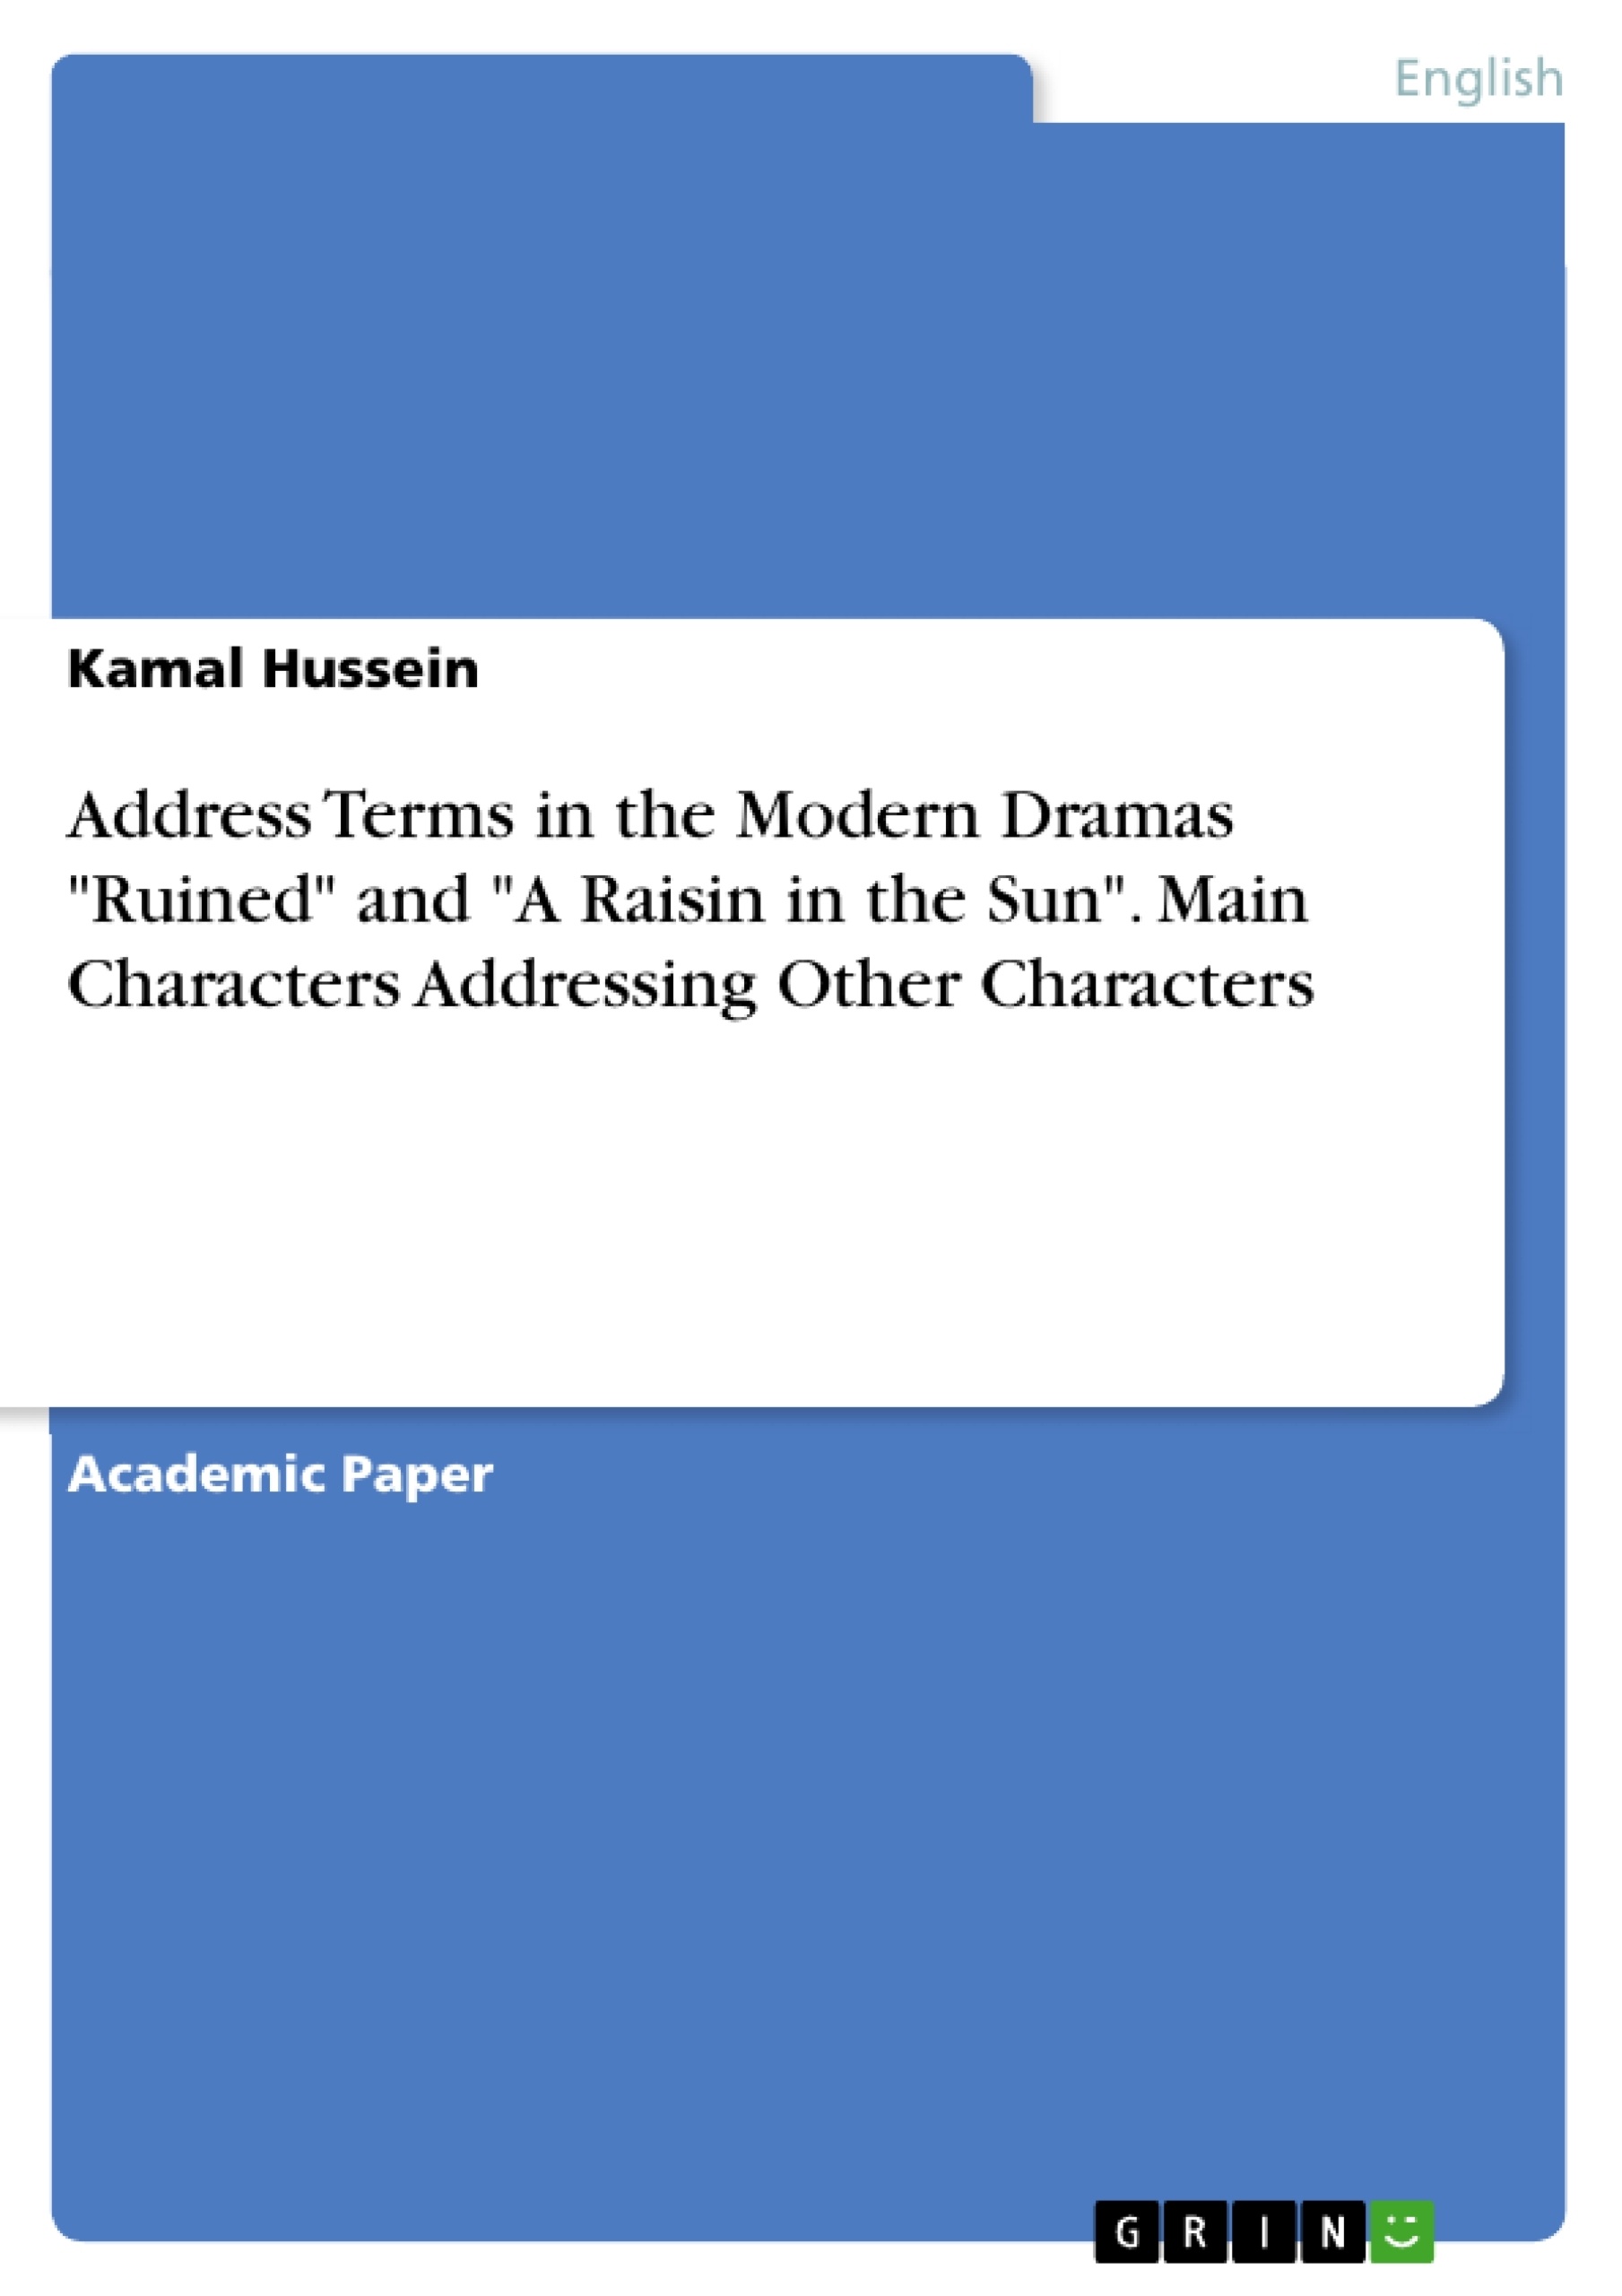 Título: Address Terms in the Modern Dramas "Ruined" and "A Raisin in the Sun". Main Characters Addressing Other Characters